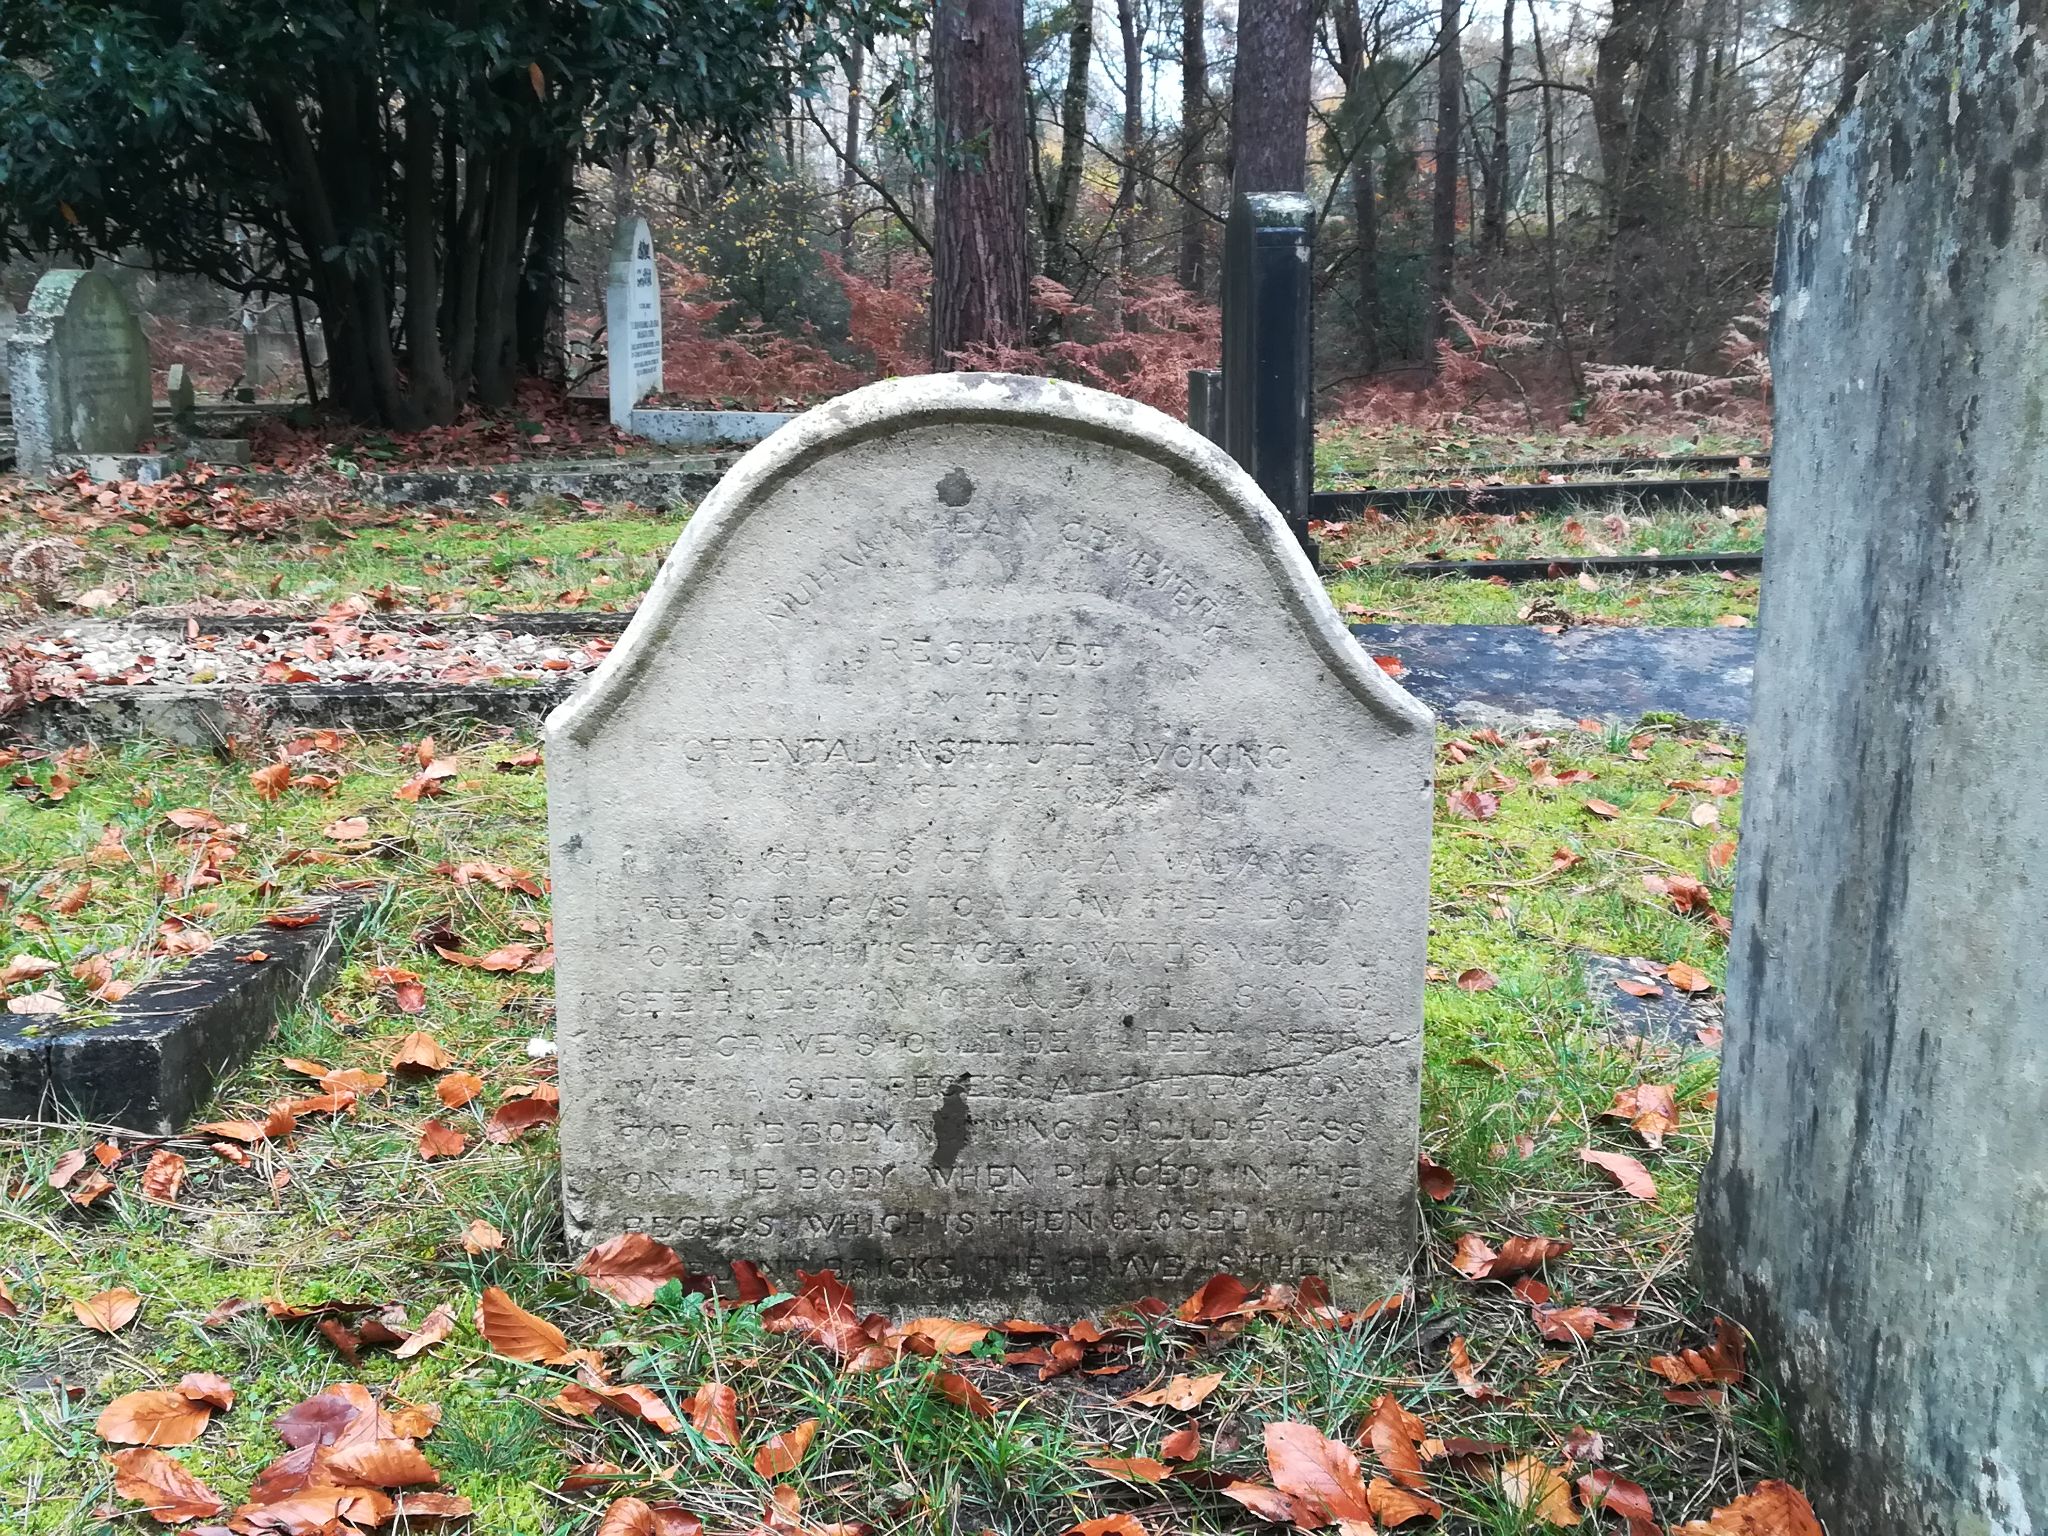 A 'Qiblah' stone Leitner placed in the Muhammadan cemetery inscribed with specific instructions on how to bury Muslims (MEE/Indlieb Farazi Saber)